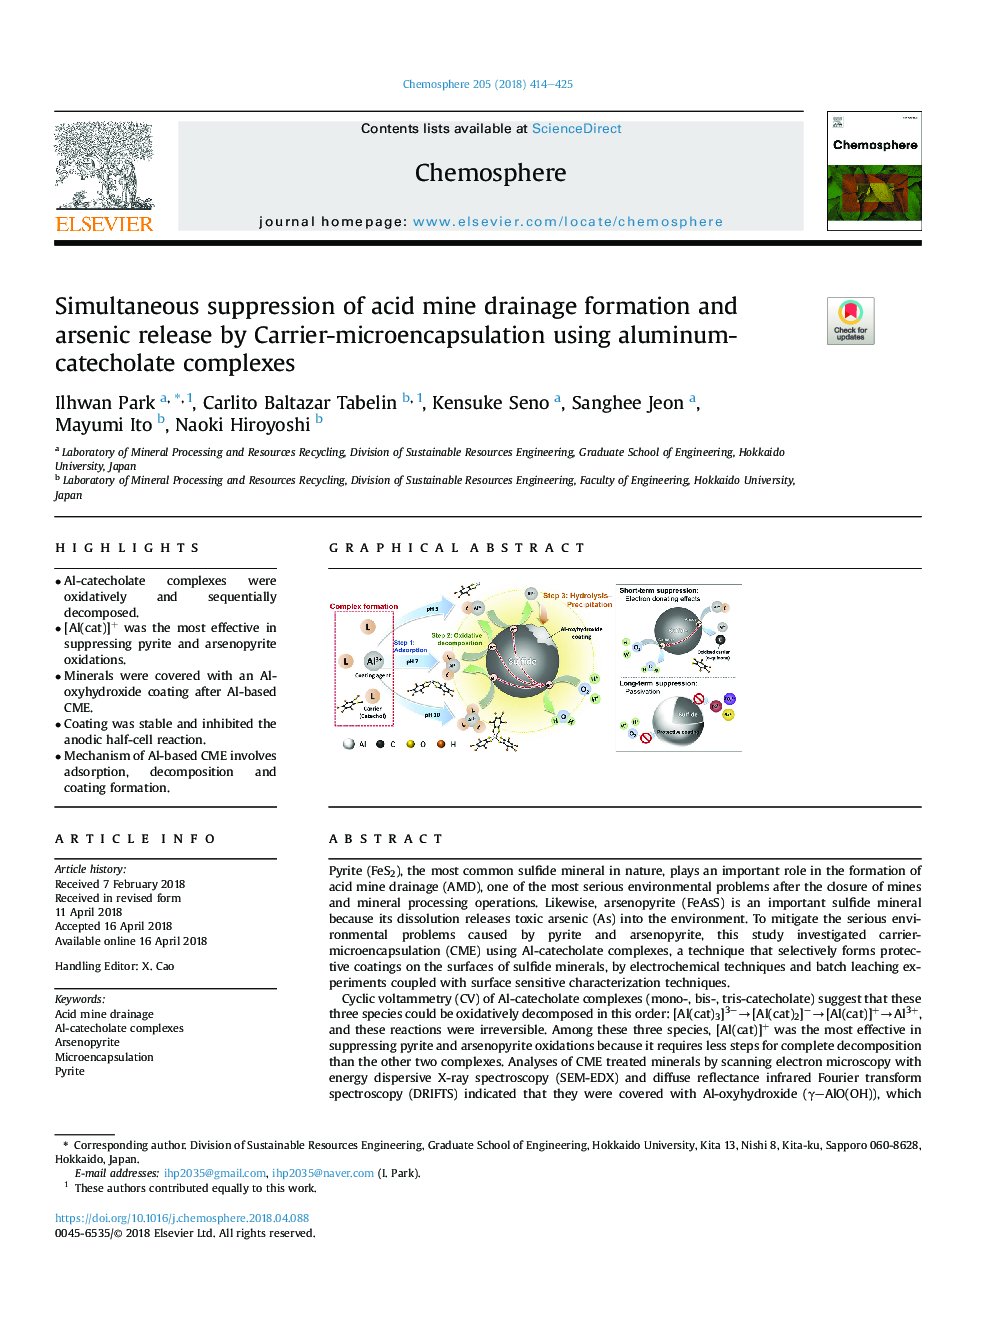 Simultaneous suppression of acid mine drainage formation and arsenic release by Carrier-microencapsulation using aluminum-catecholate complexes